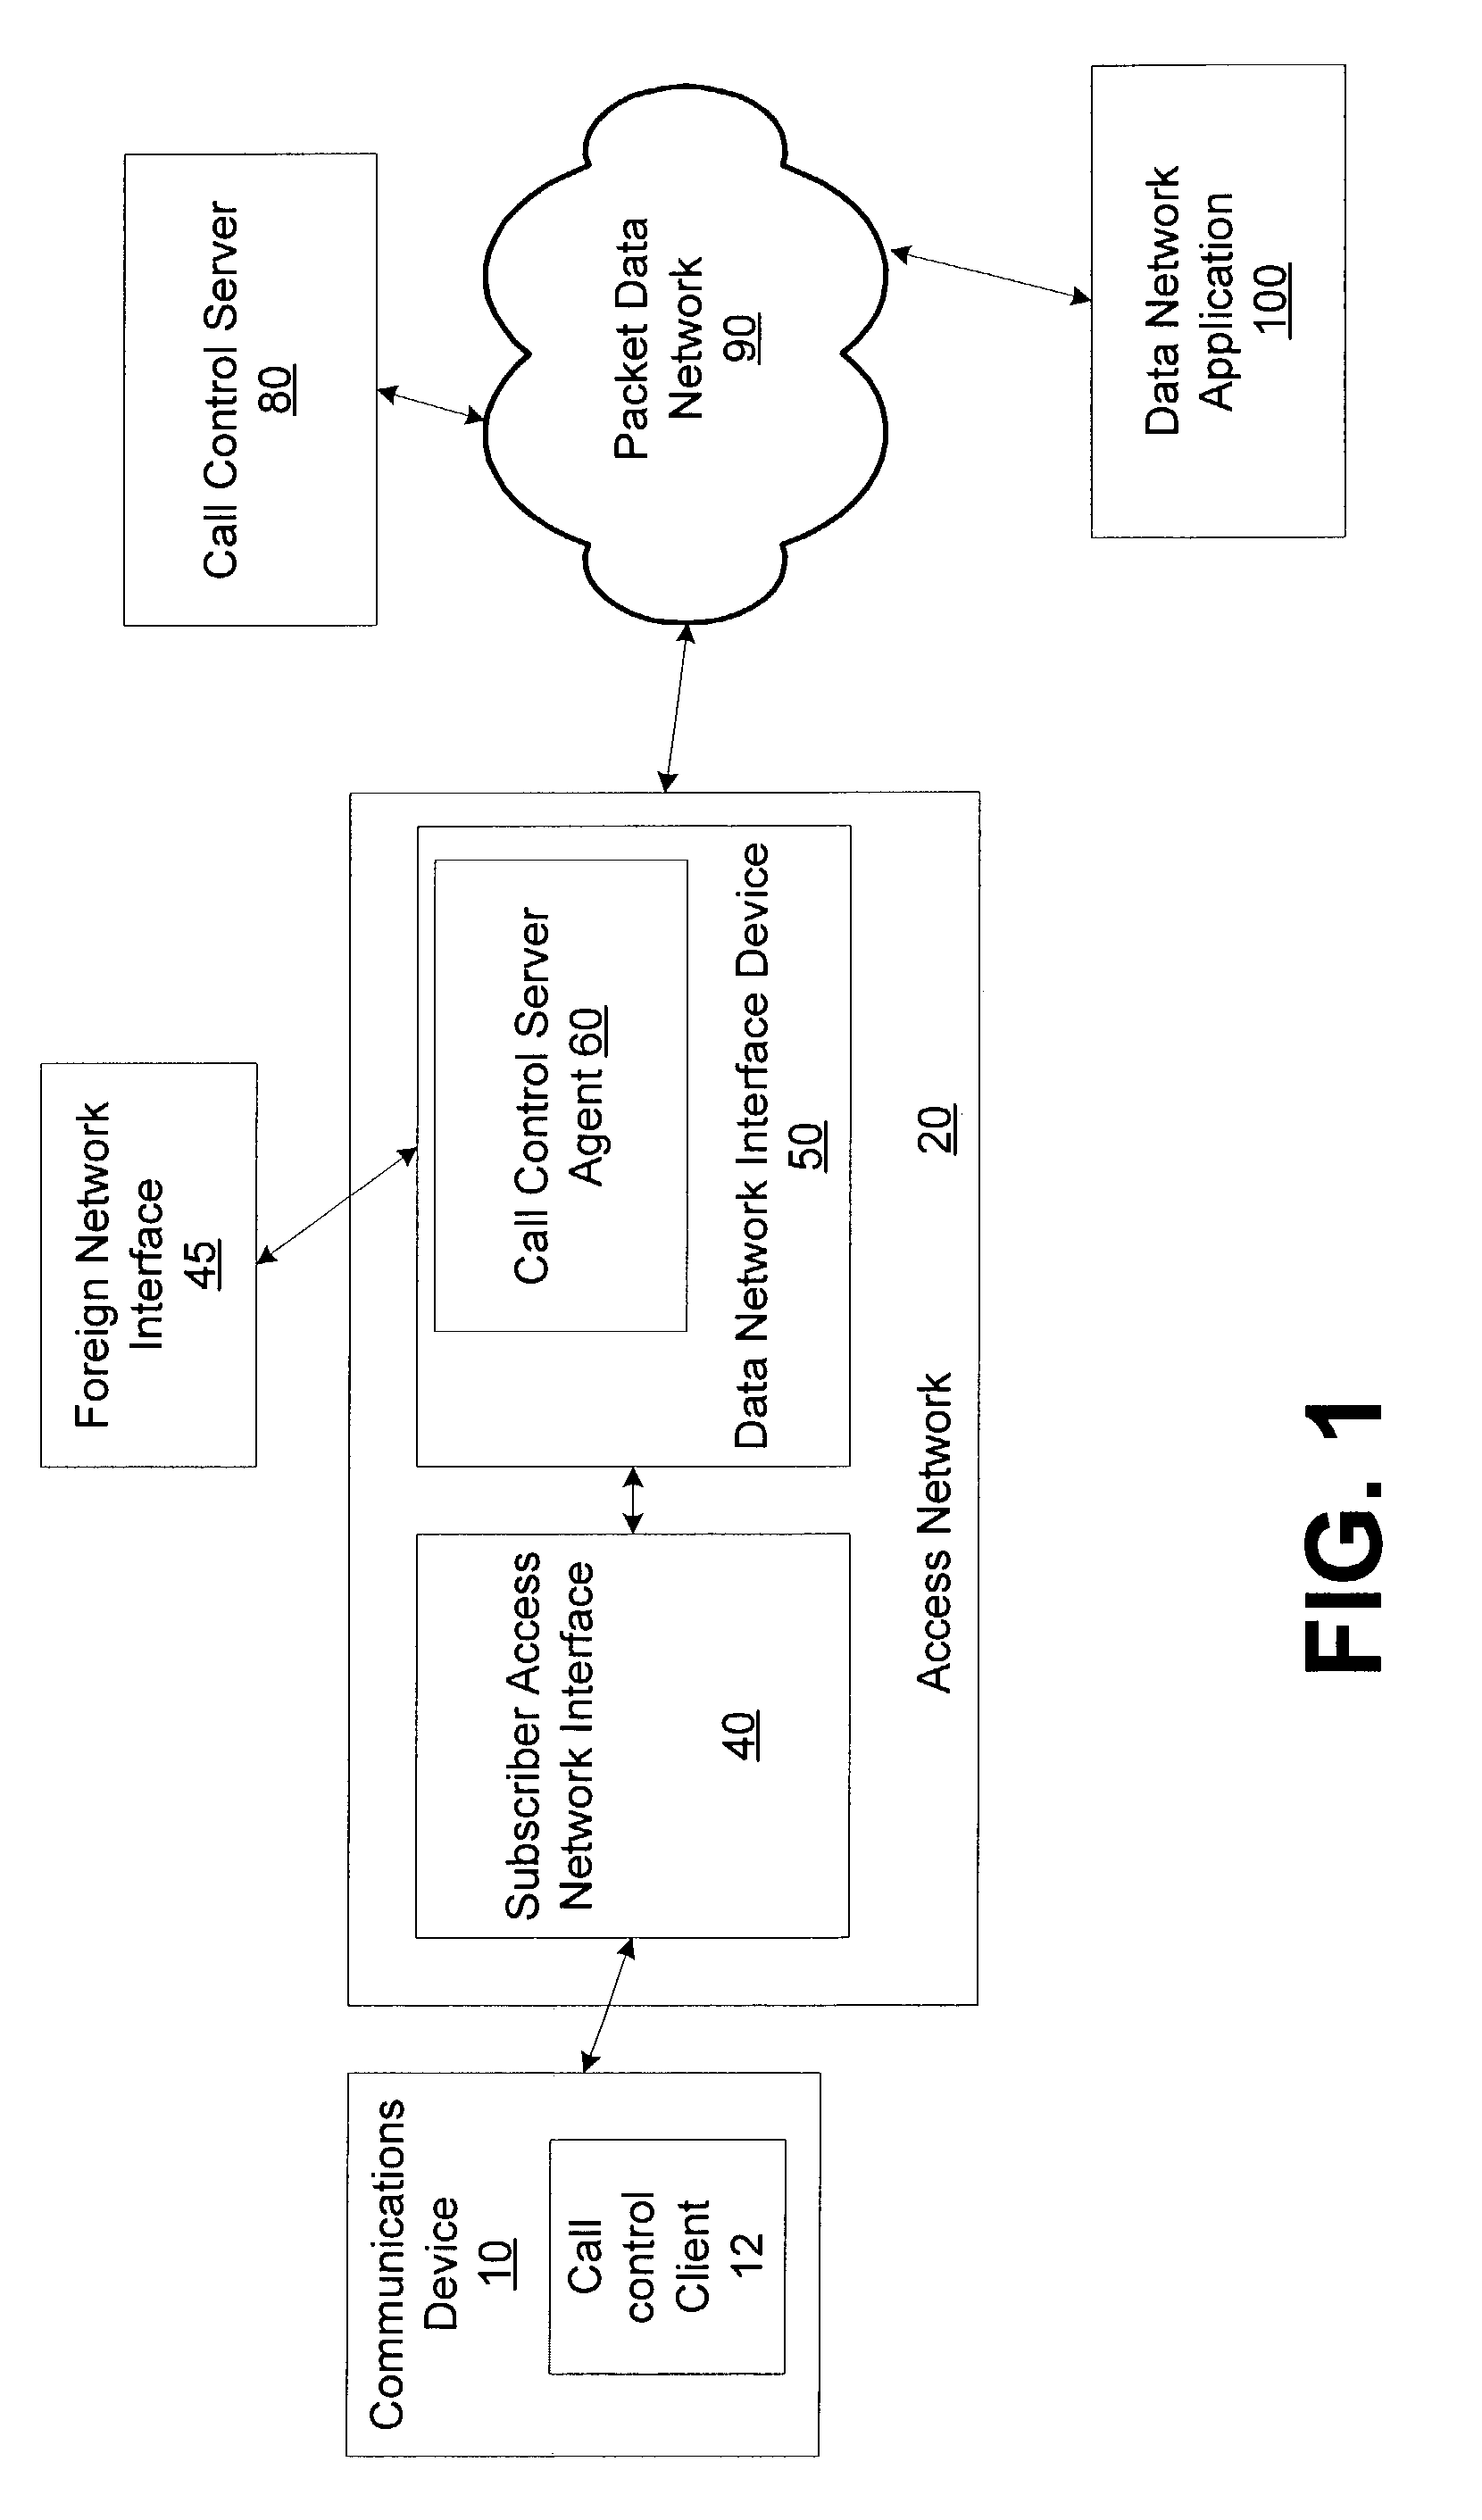 System and method for integrating call control and data network access components